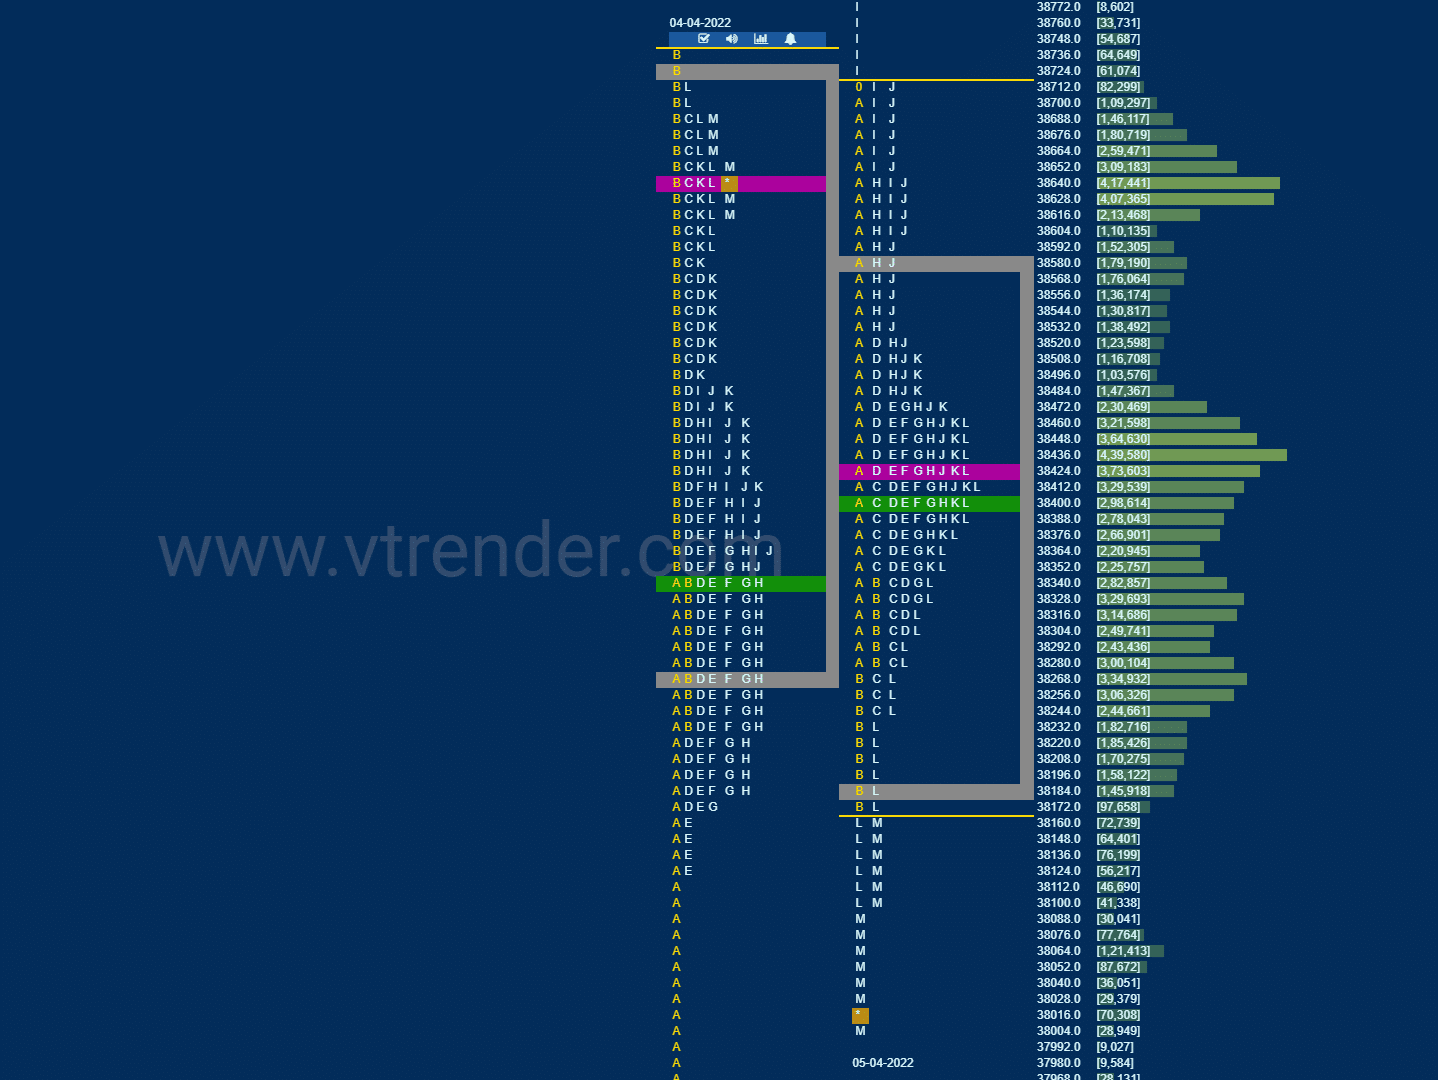 Bnf 2 Market Profile Analysis Dated 05Th April 2022 Banknifty Futures, Charts, Day Trading, Intraday Trading, Intraday Trading Strategies, Market Profile, Market Profile Trading Strategies, Nifty Futures, Order Flow Analysis, Support And Resistance, Technical Analysis, Trading Strategies, Volume Profile Trading